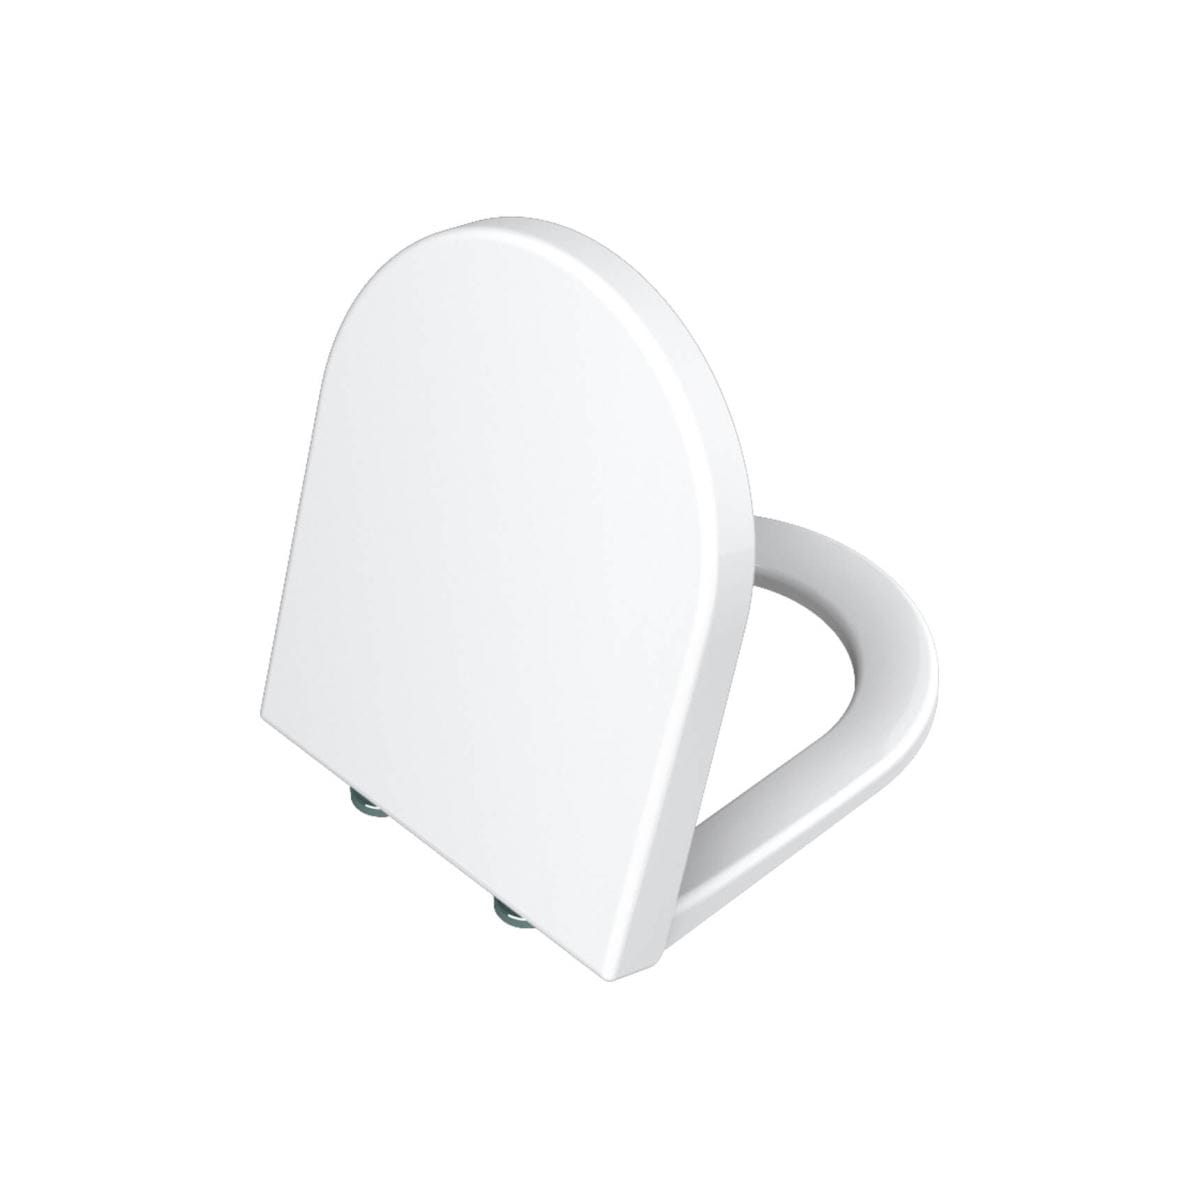 Details about   Toilet Seat to fit Vitra Integra S80 with automatic closing and removable k und abnehmbar data-mtsrclang=en-US href=# onclick=return false; 							show original title 